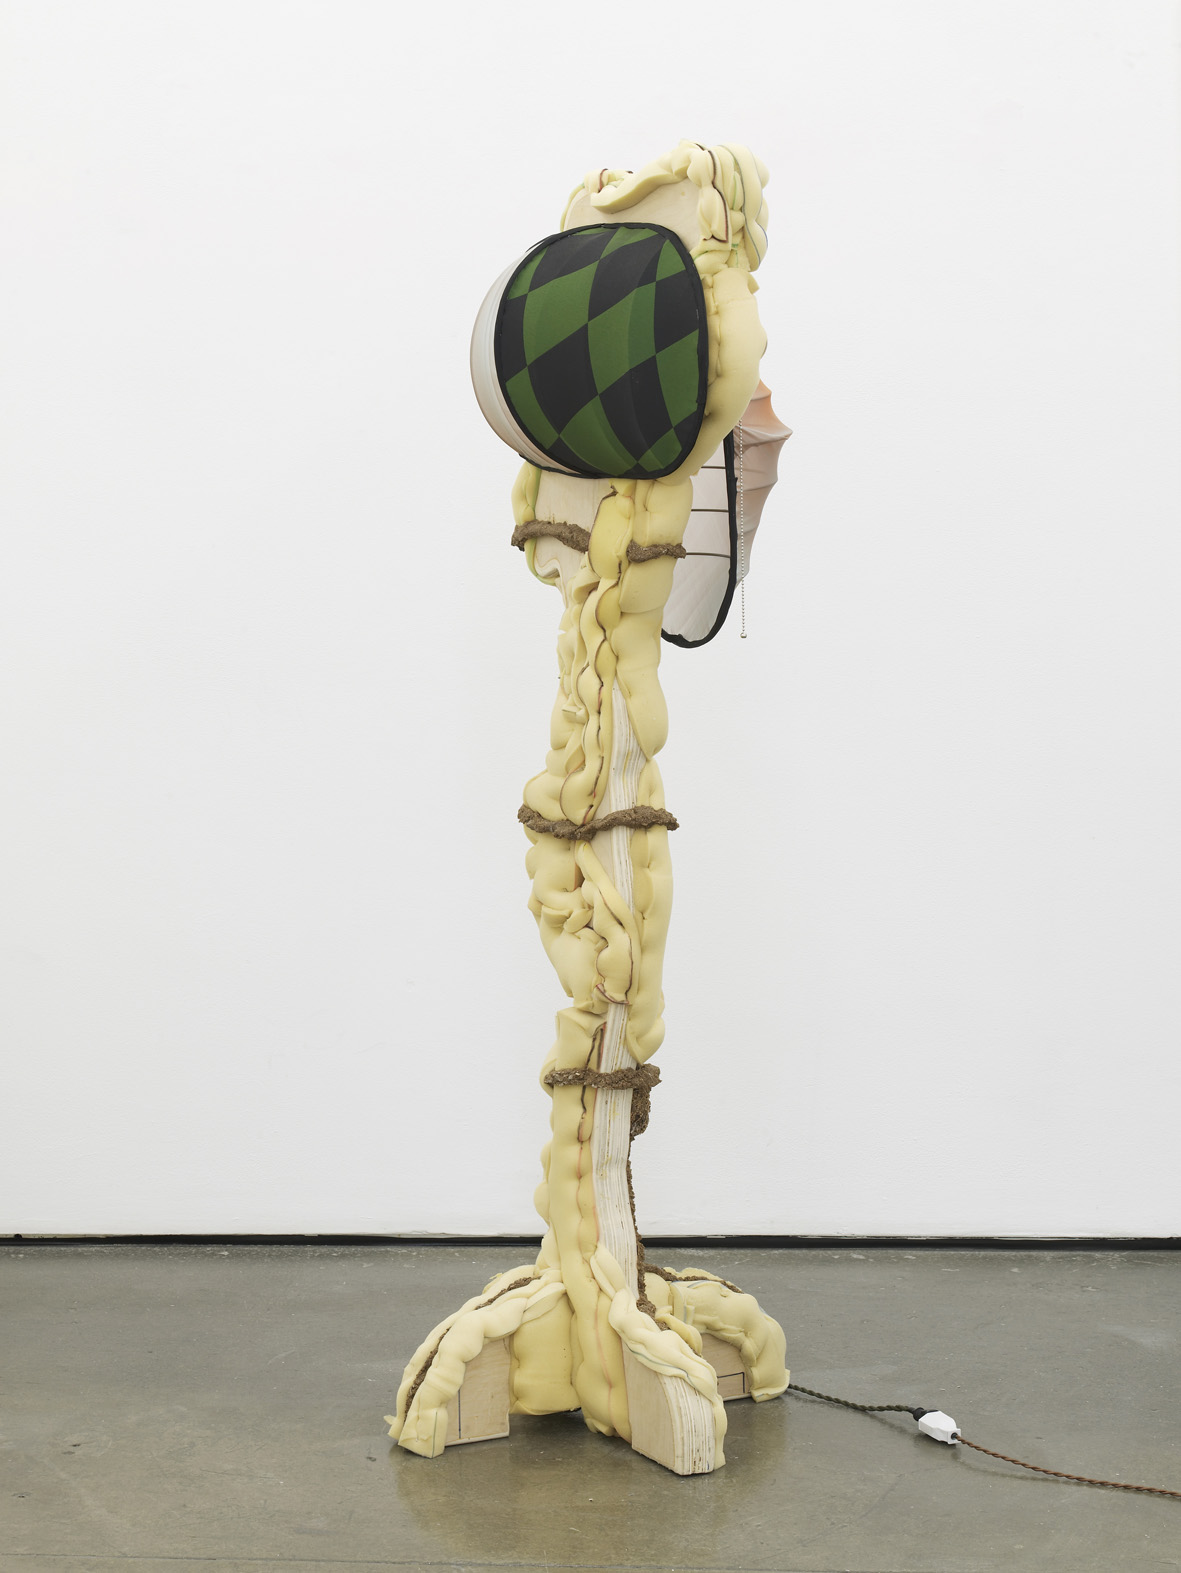     Jessi Reaves Stare Straight Ahead Standing Lamp 2015 Plywood, polyurethane foam, sawdust, steel, fabric, ink, lamp components 165.1 x 60.9 x 71.1 cm / 65 x 24 x 28 in HS12-JR5450S 